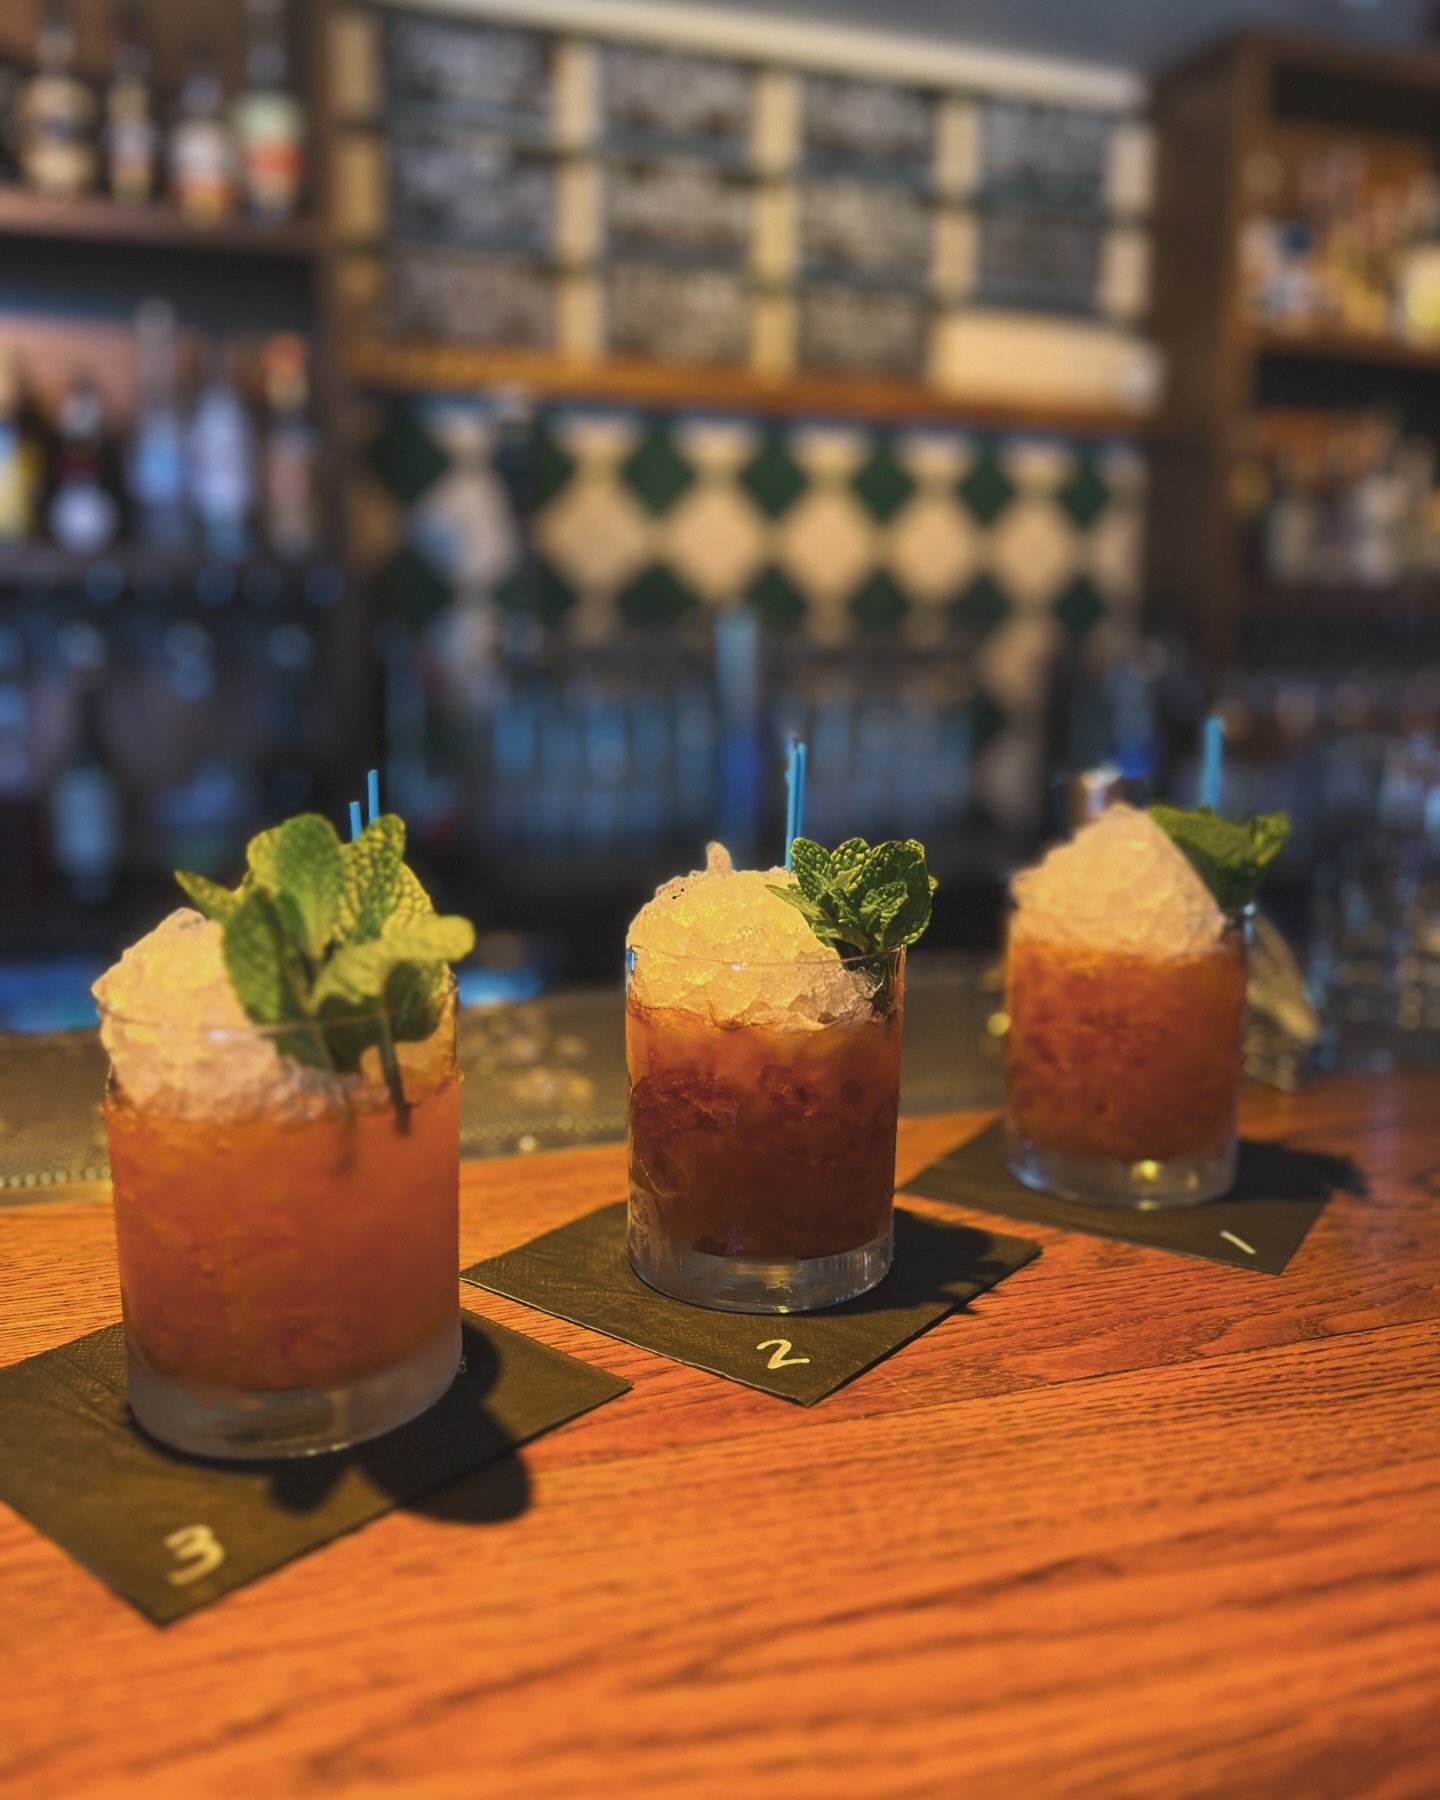 Name your odds on each derby mint julep. 

#gussies #gussiesraleigh #raleigheats #raleighbars #raleighbestbars #raleighdrinks #raleighcocktails #raleighbartenders #raleighfoodies #raleighhospitality #raleigh #raleighnc #raleighlife #raleighliving #do